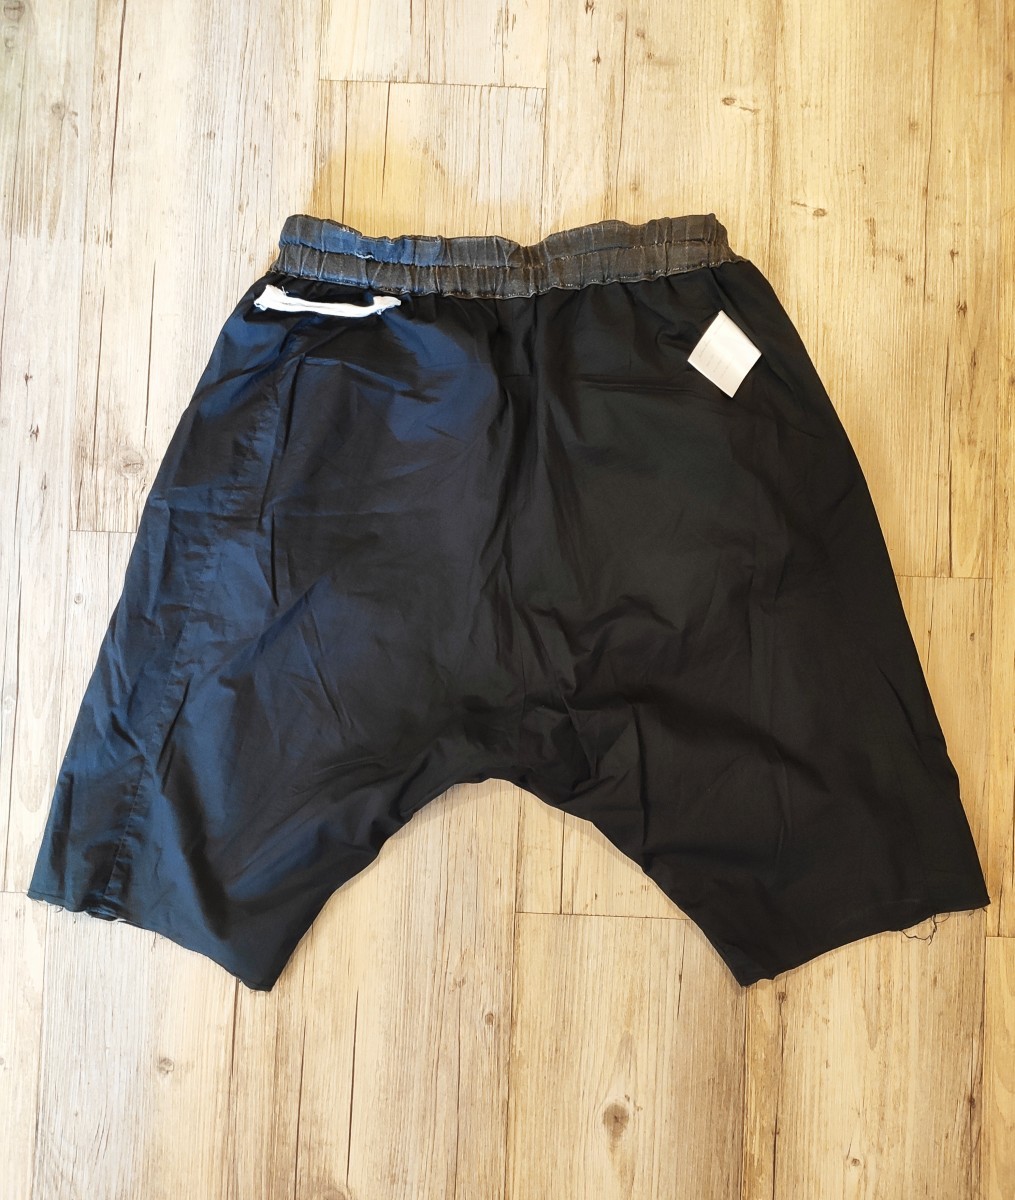 GRAIL! SS15 charcoal shorts. Like Paul Harnden or A1923 - 4